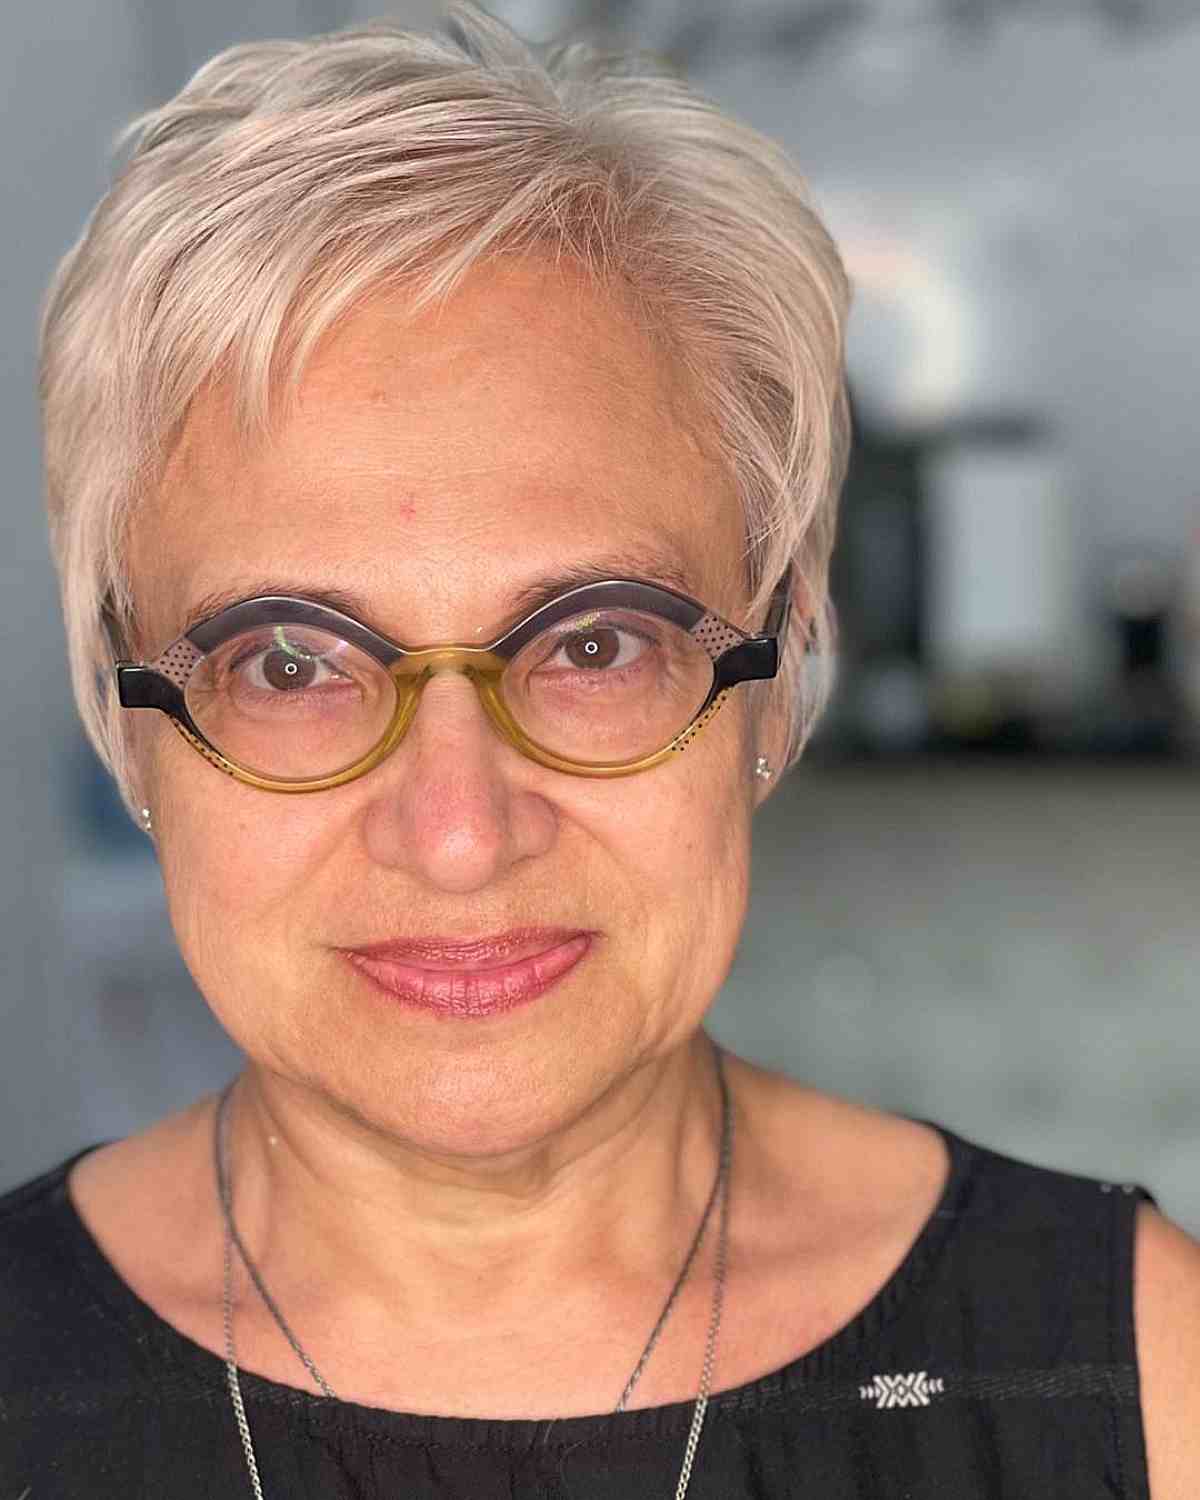 pixie haircut for women over 60 with glasses